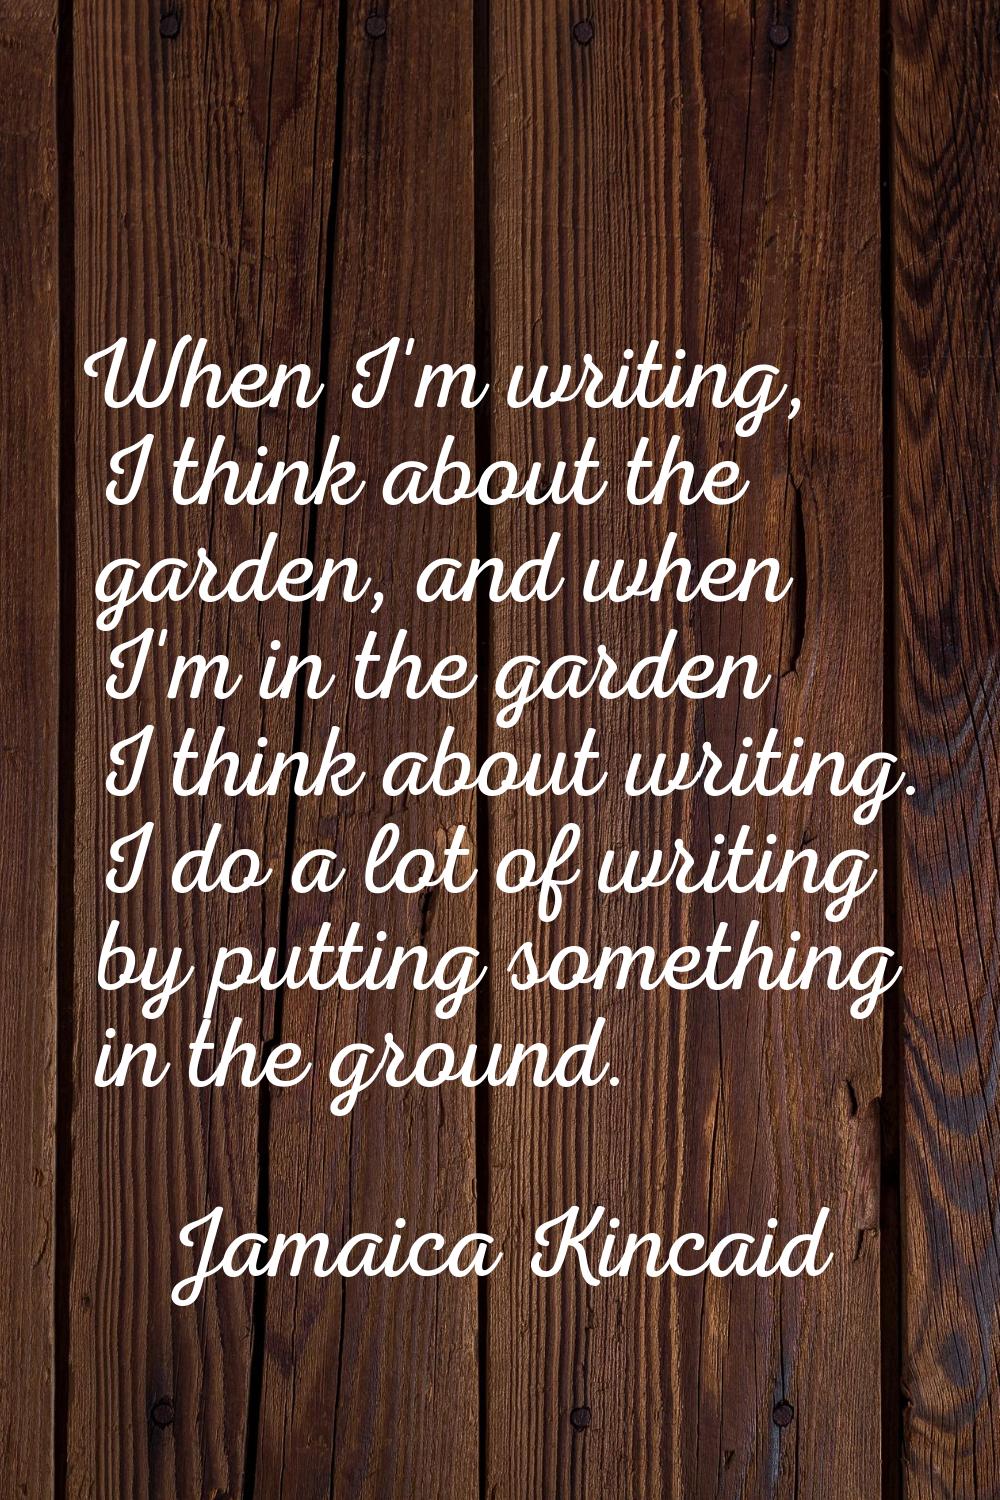 When I'm writing, I think about the garden, and when I'm in the garden I think about writing. I do 